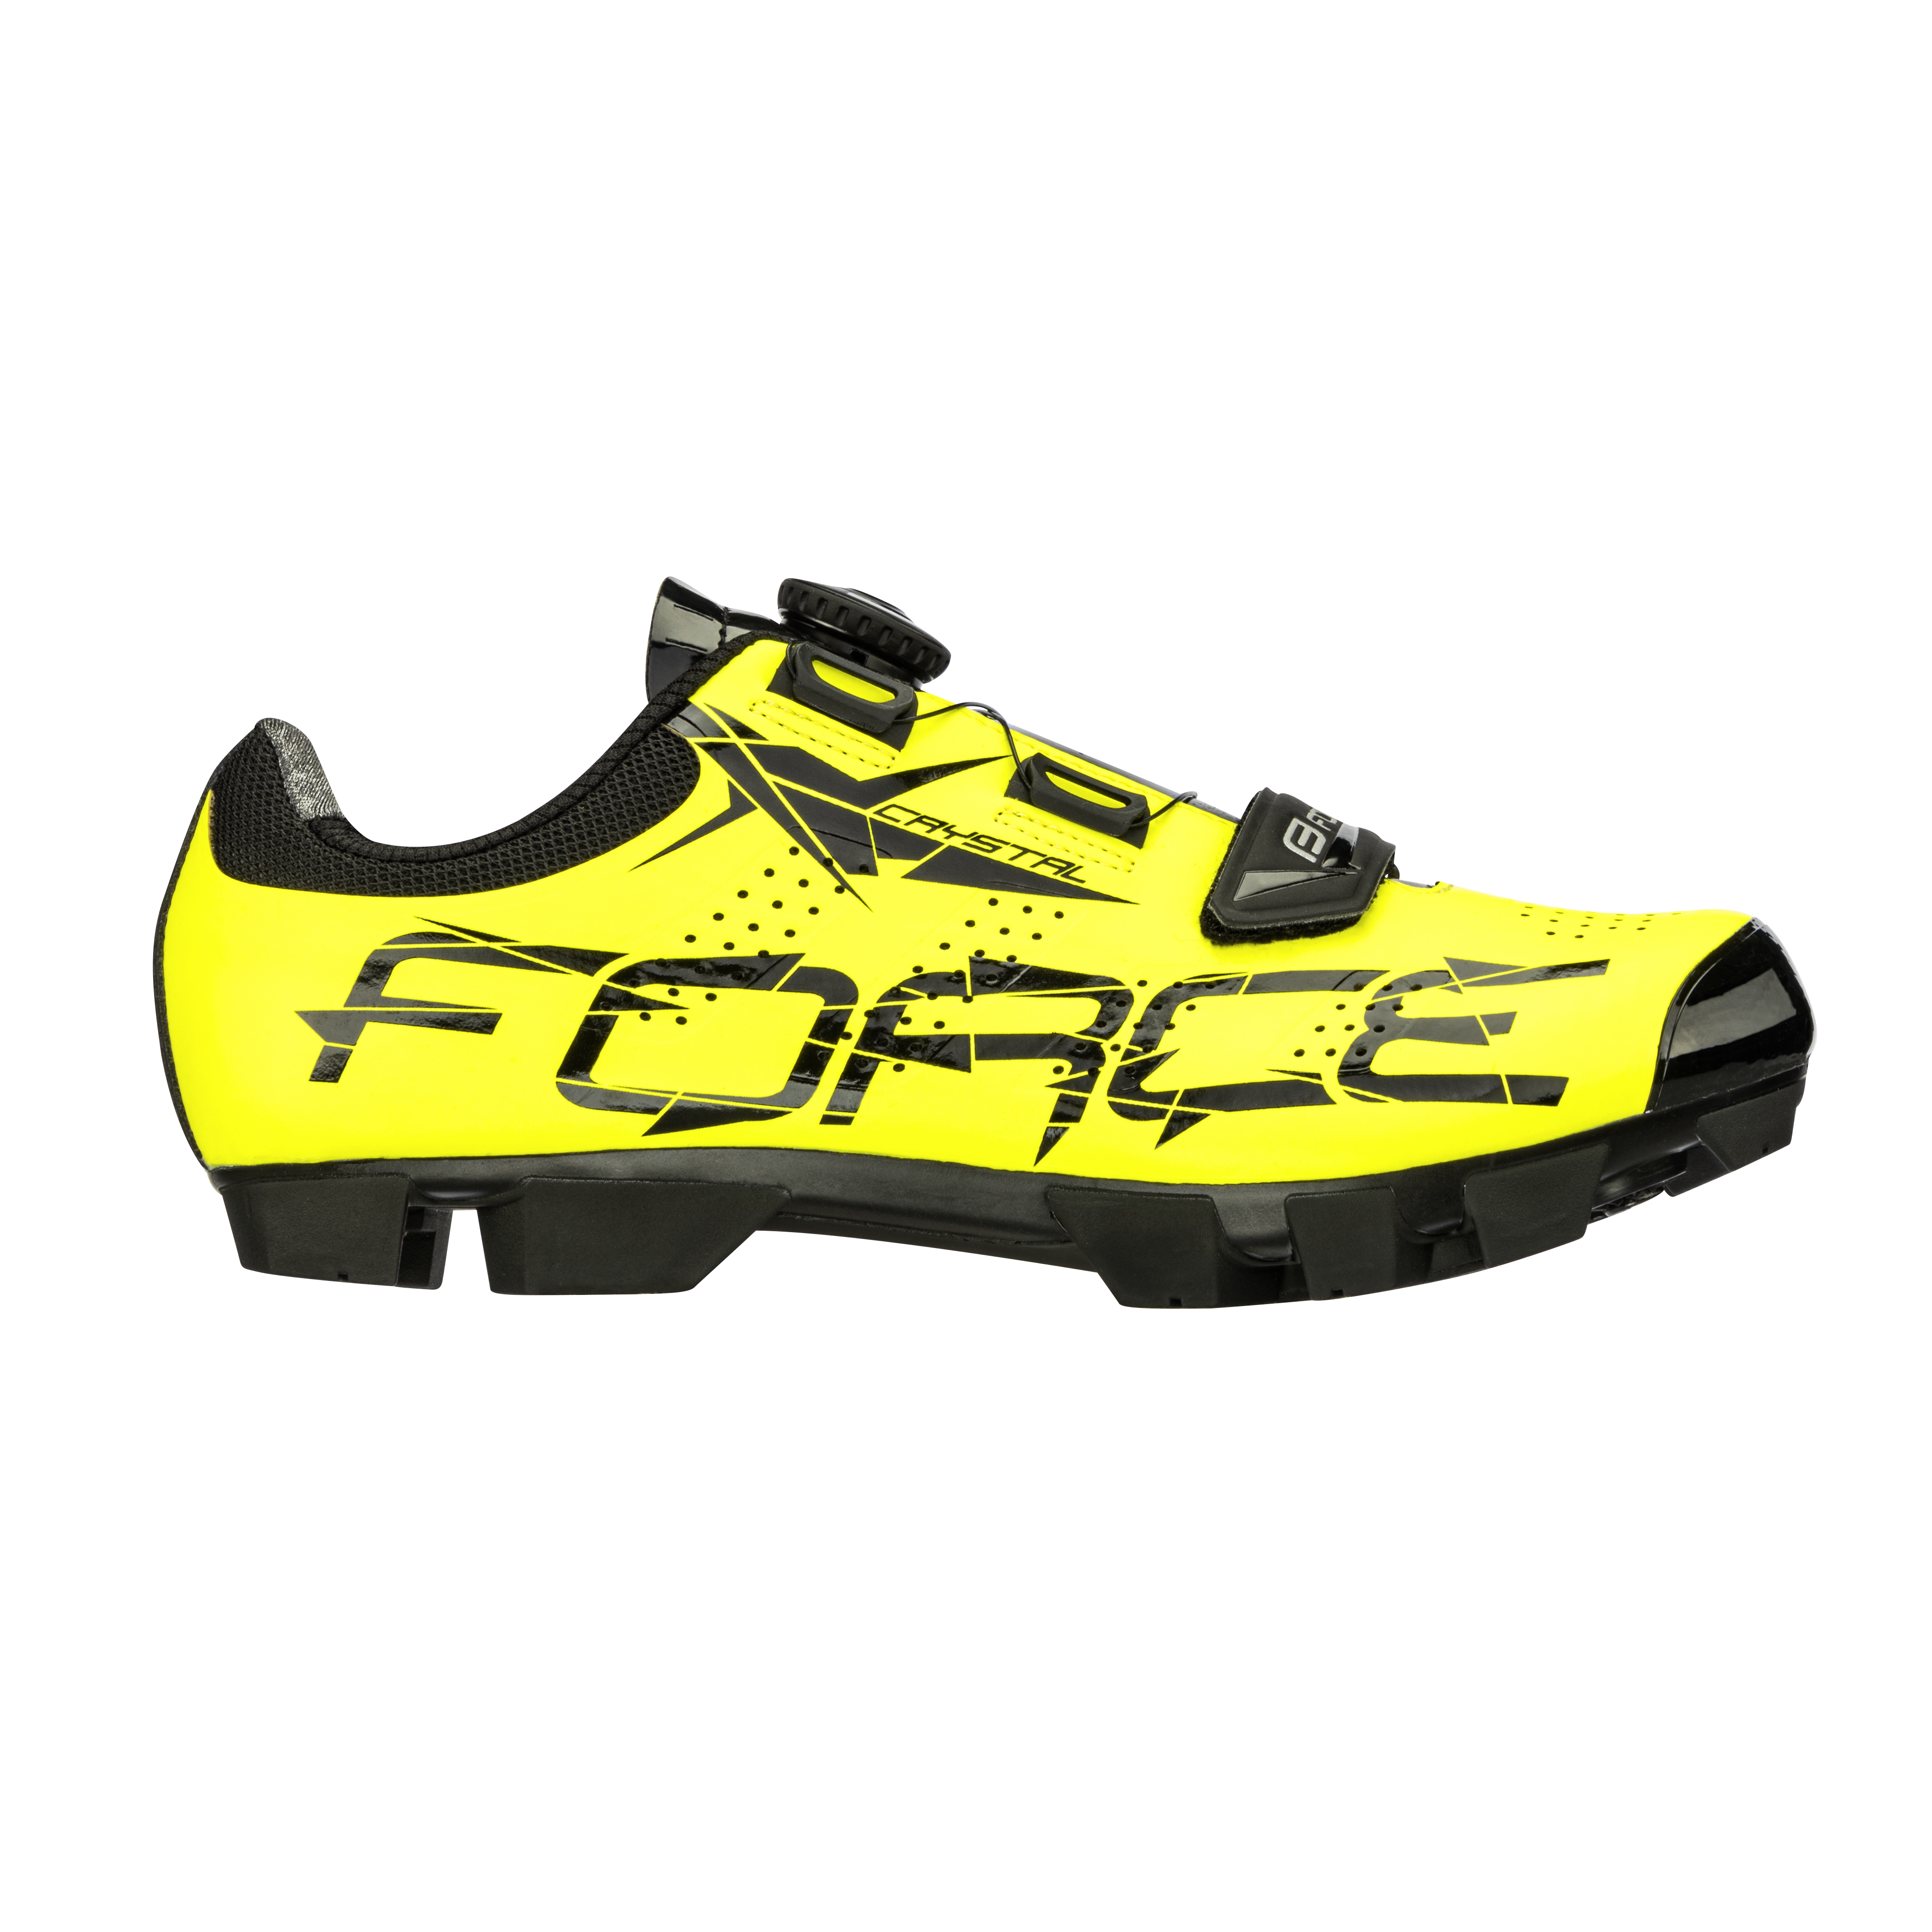 tretry FORCE MTB CRYSTAL, fluo 47